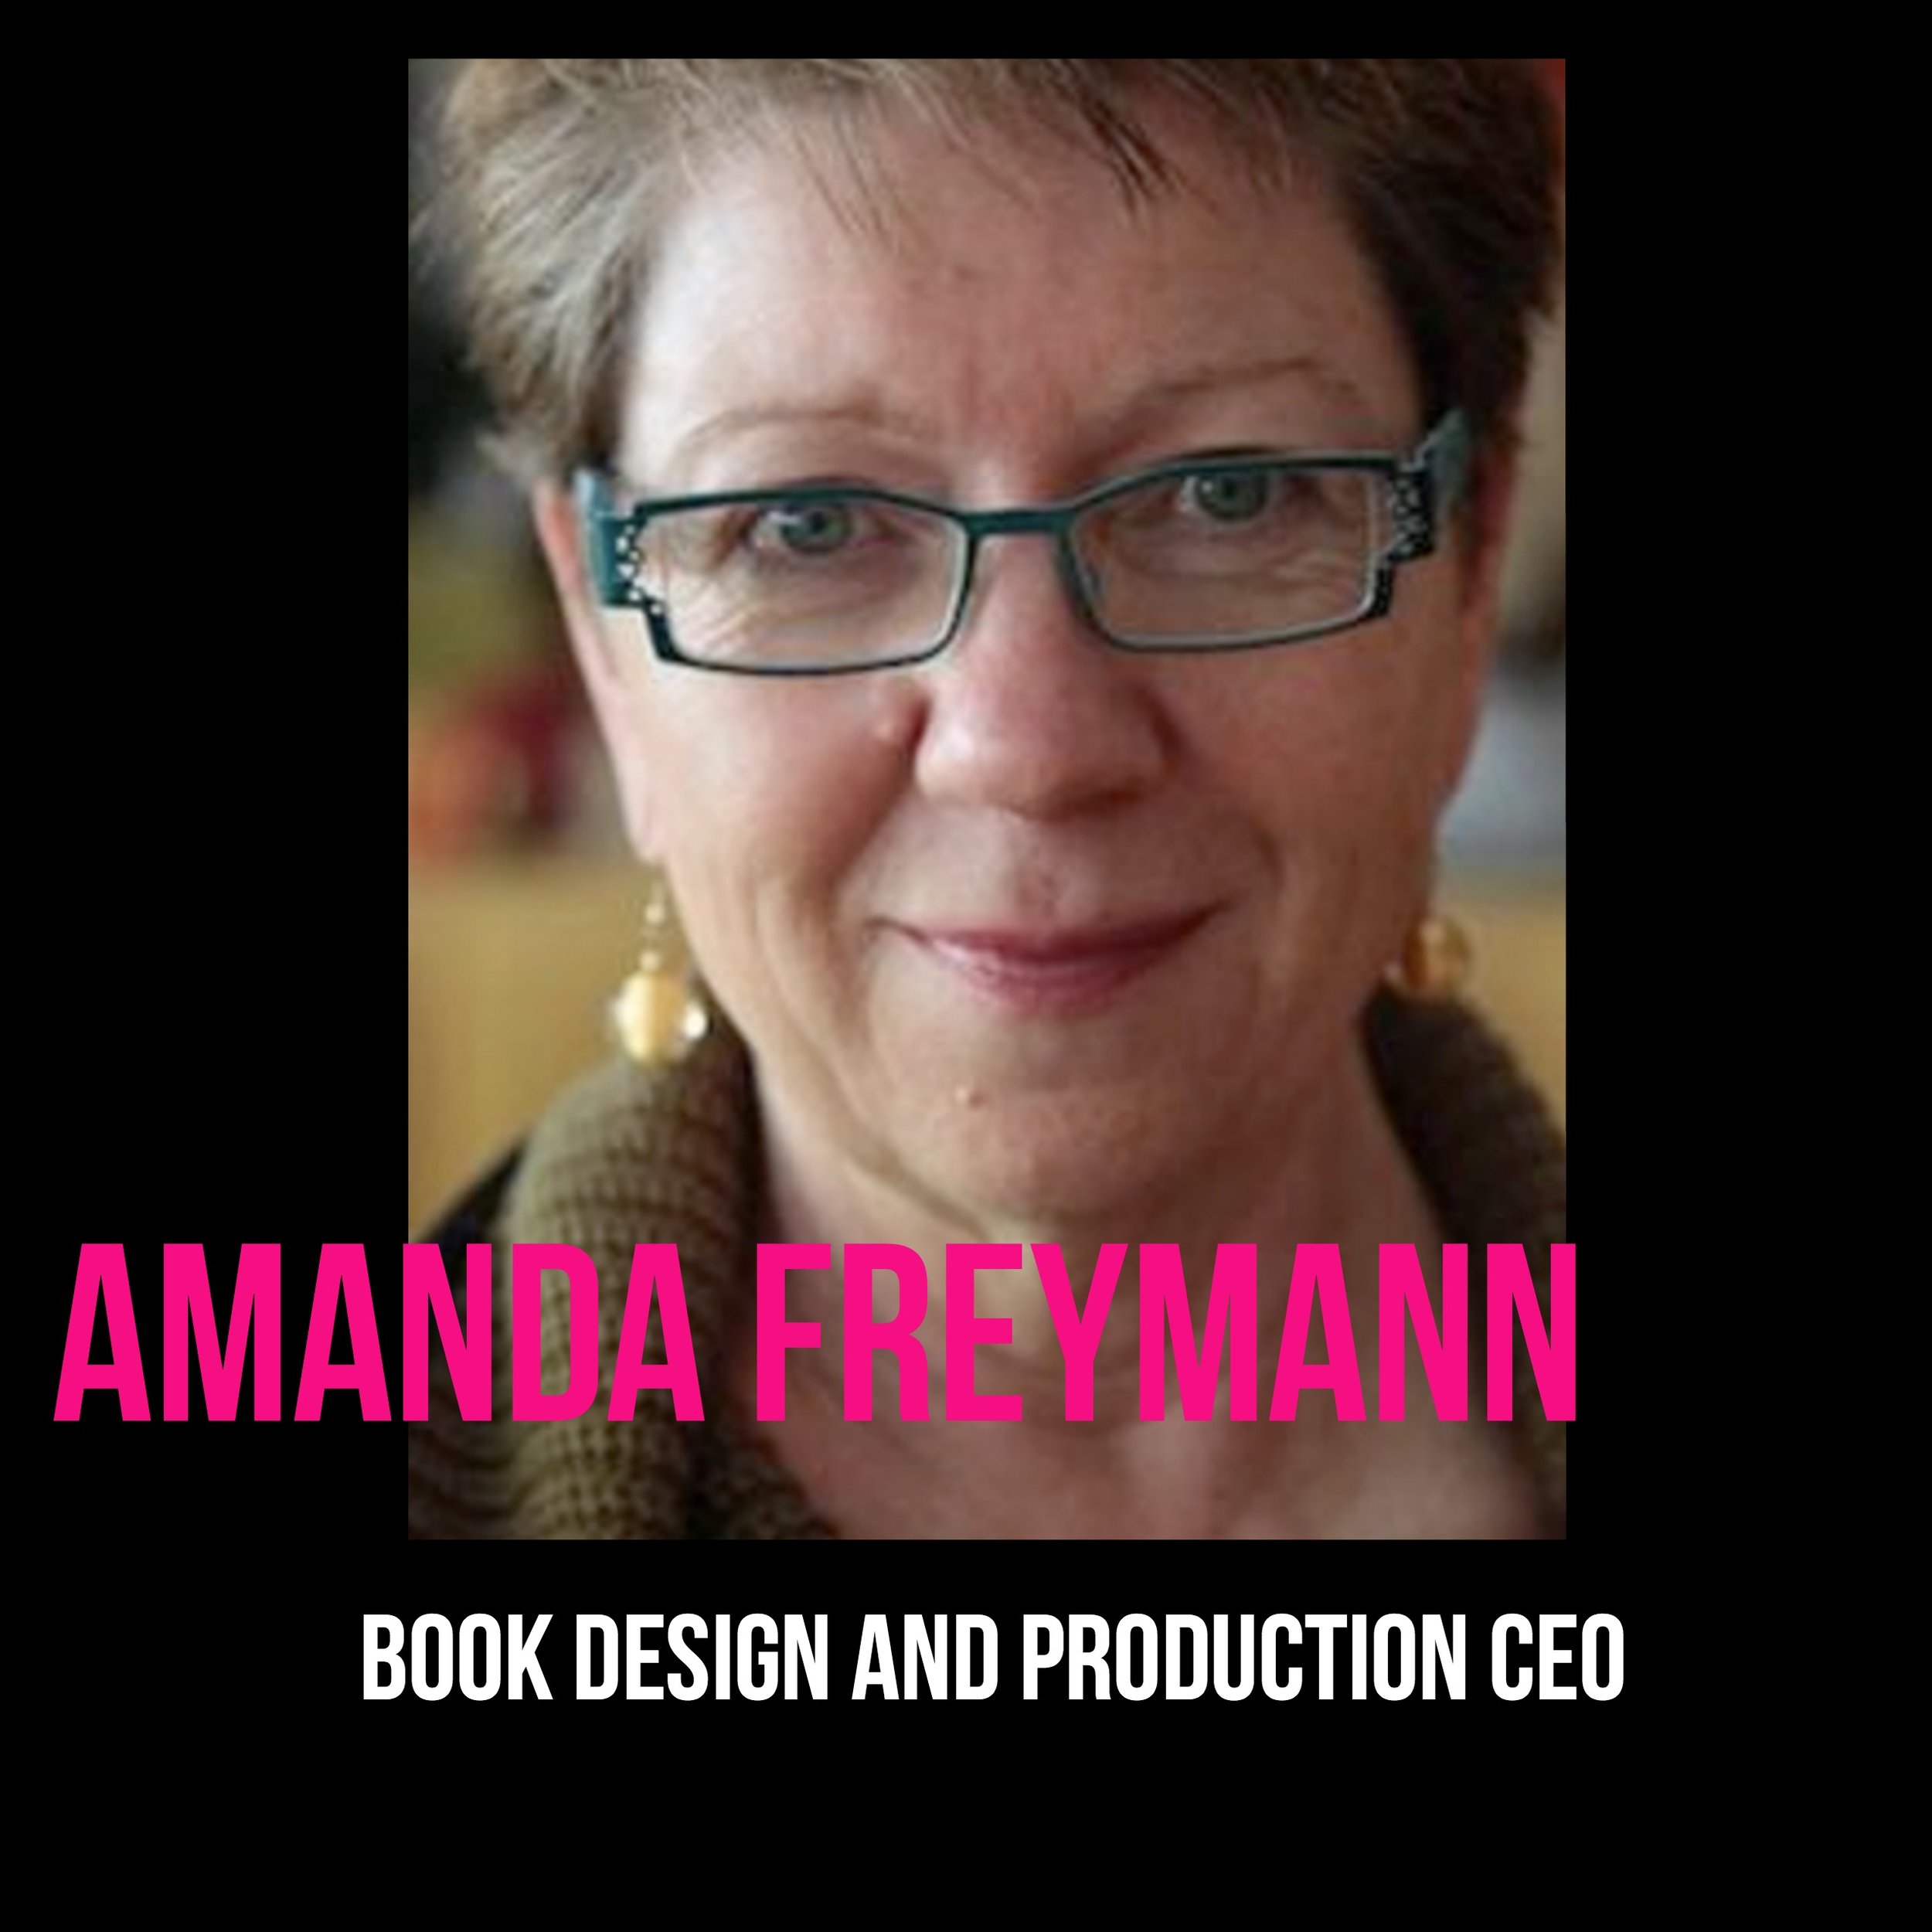 THE JILLS OF ALL TRADES™ Amanda Freymann Book Design and Production CEO